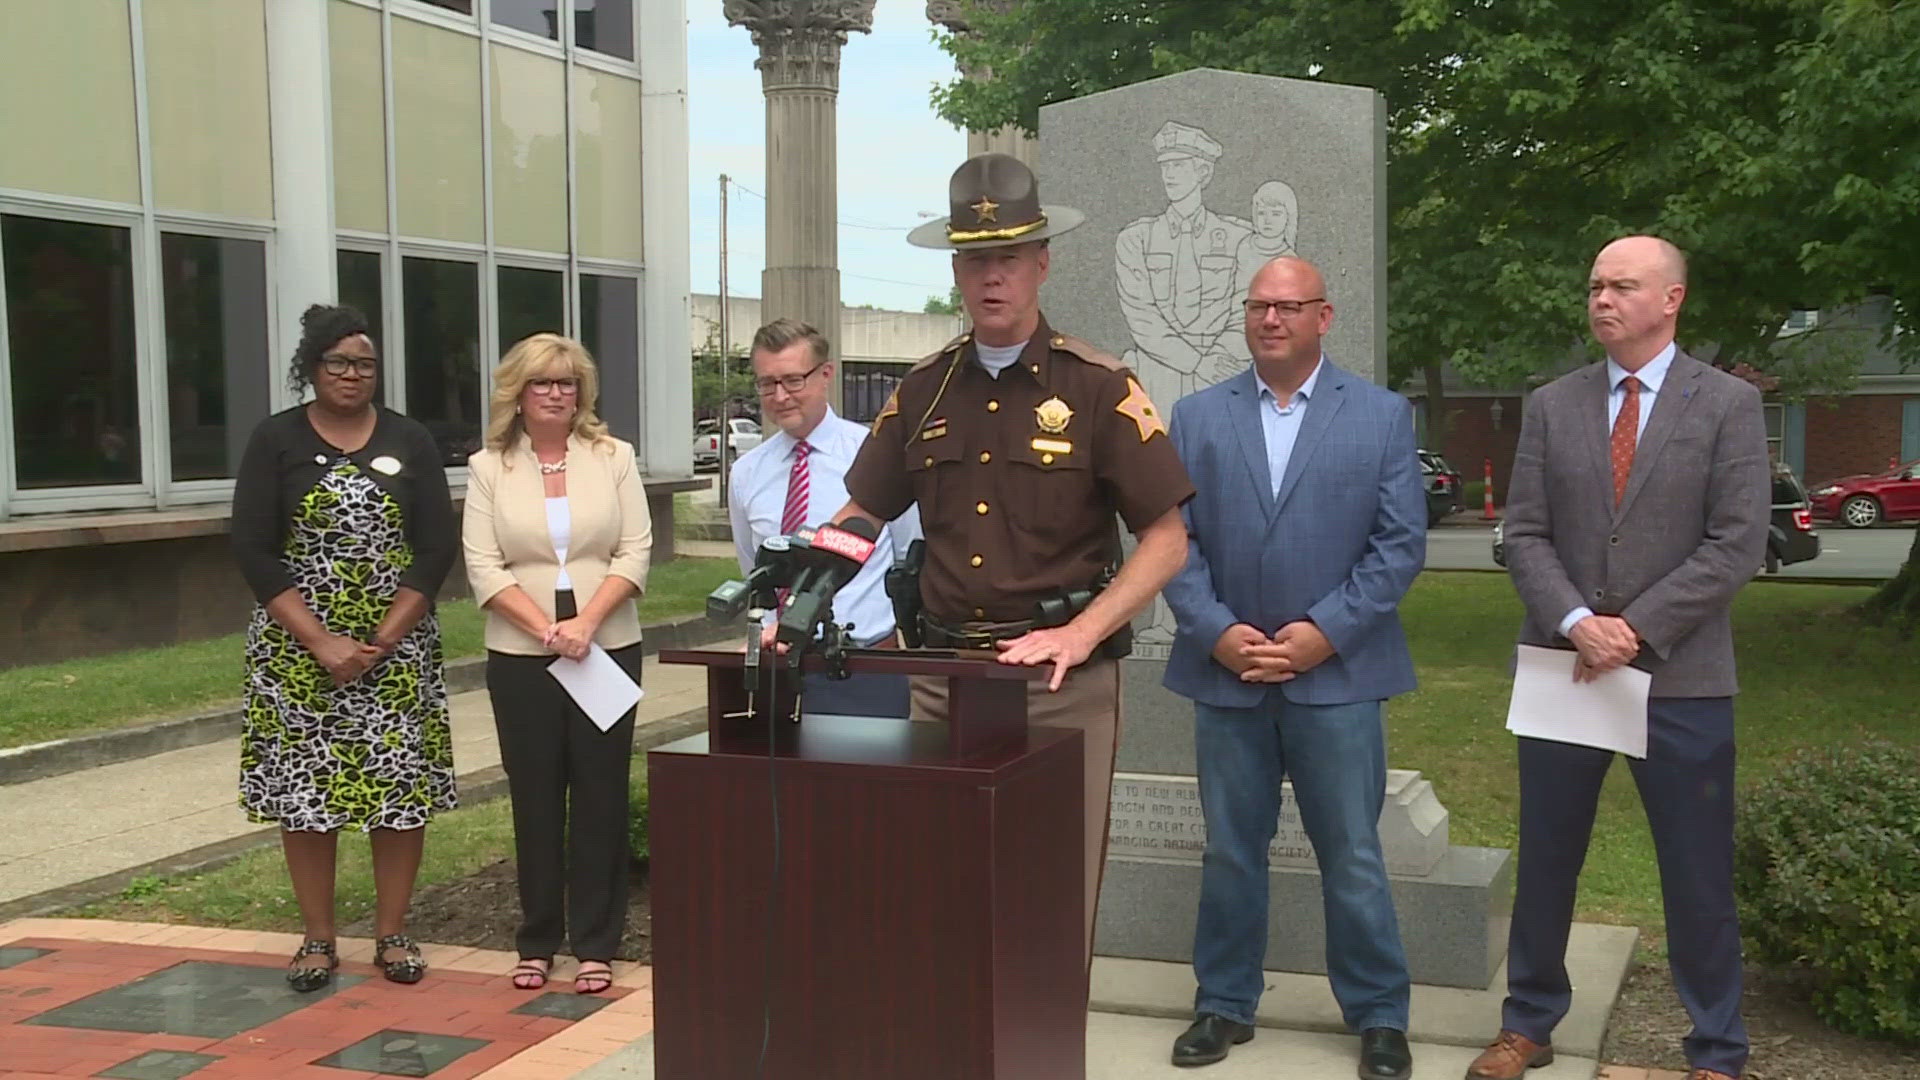 In southern Indiana, leaders in Floyd county announced a new drug interdiction task force on Wednesday.